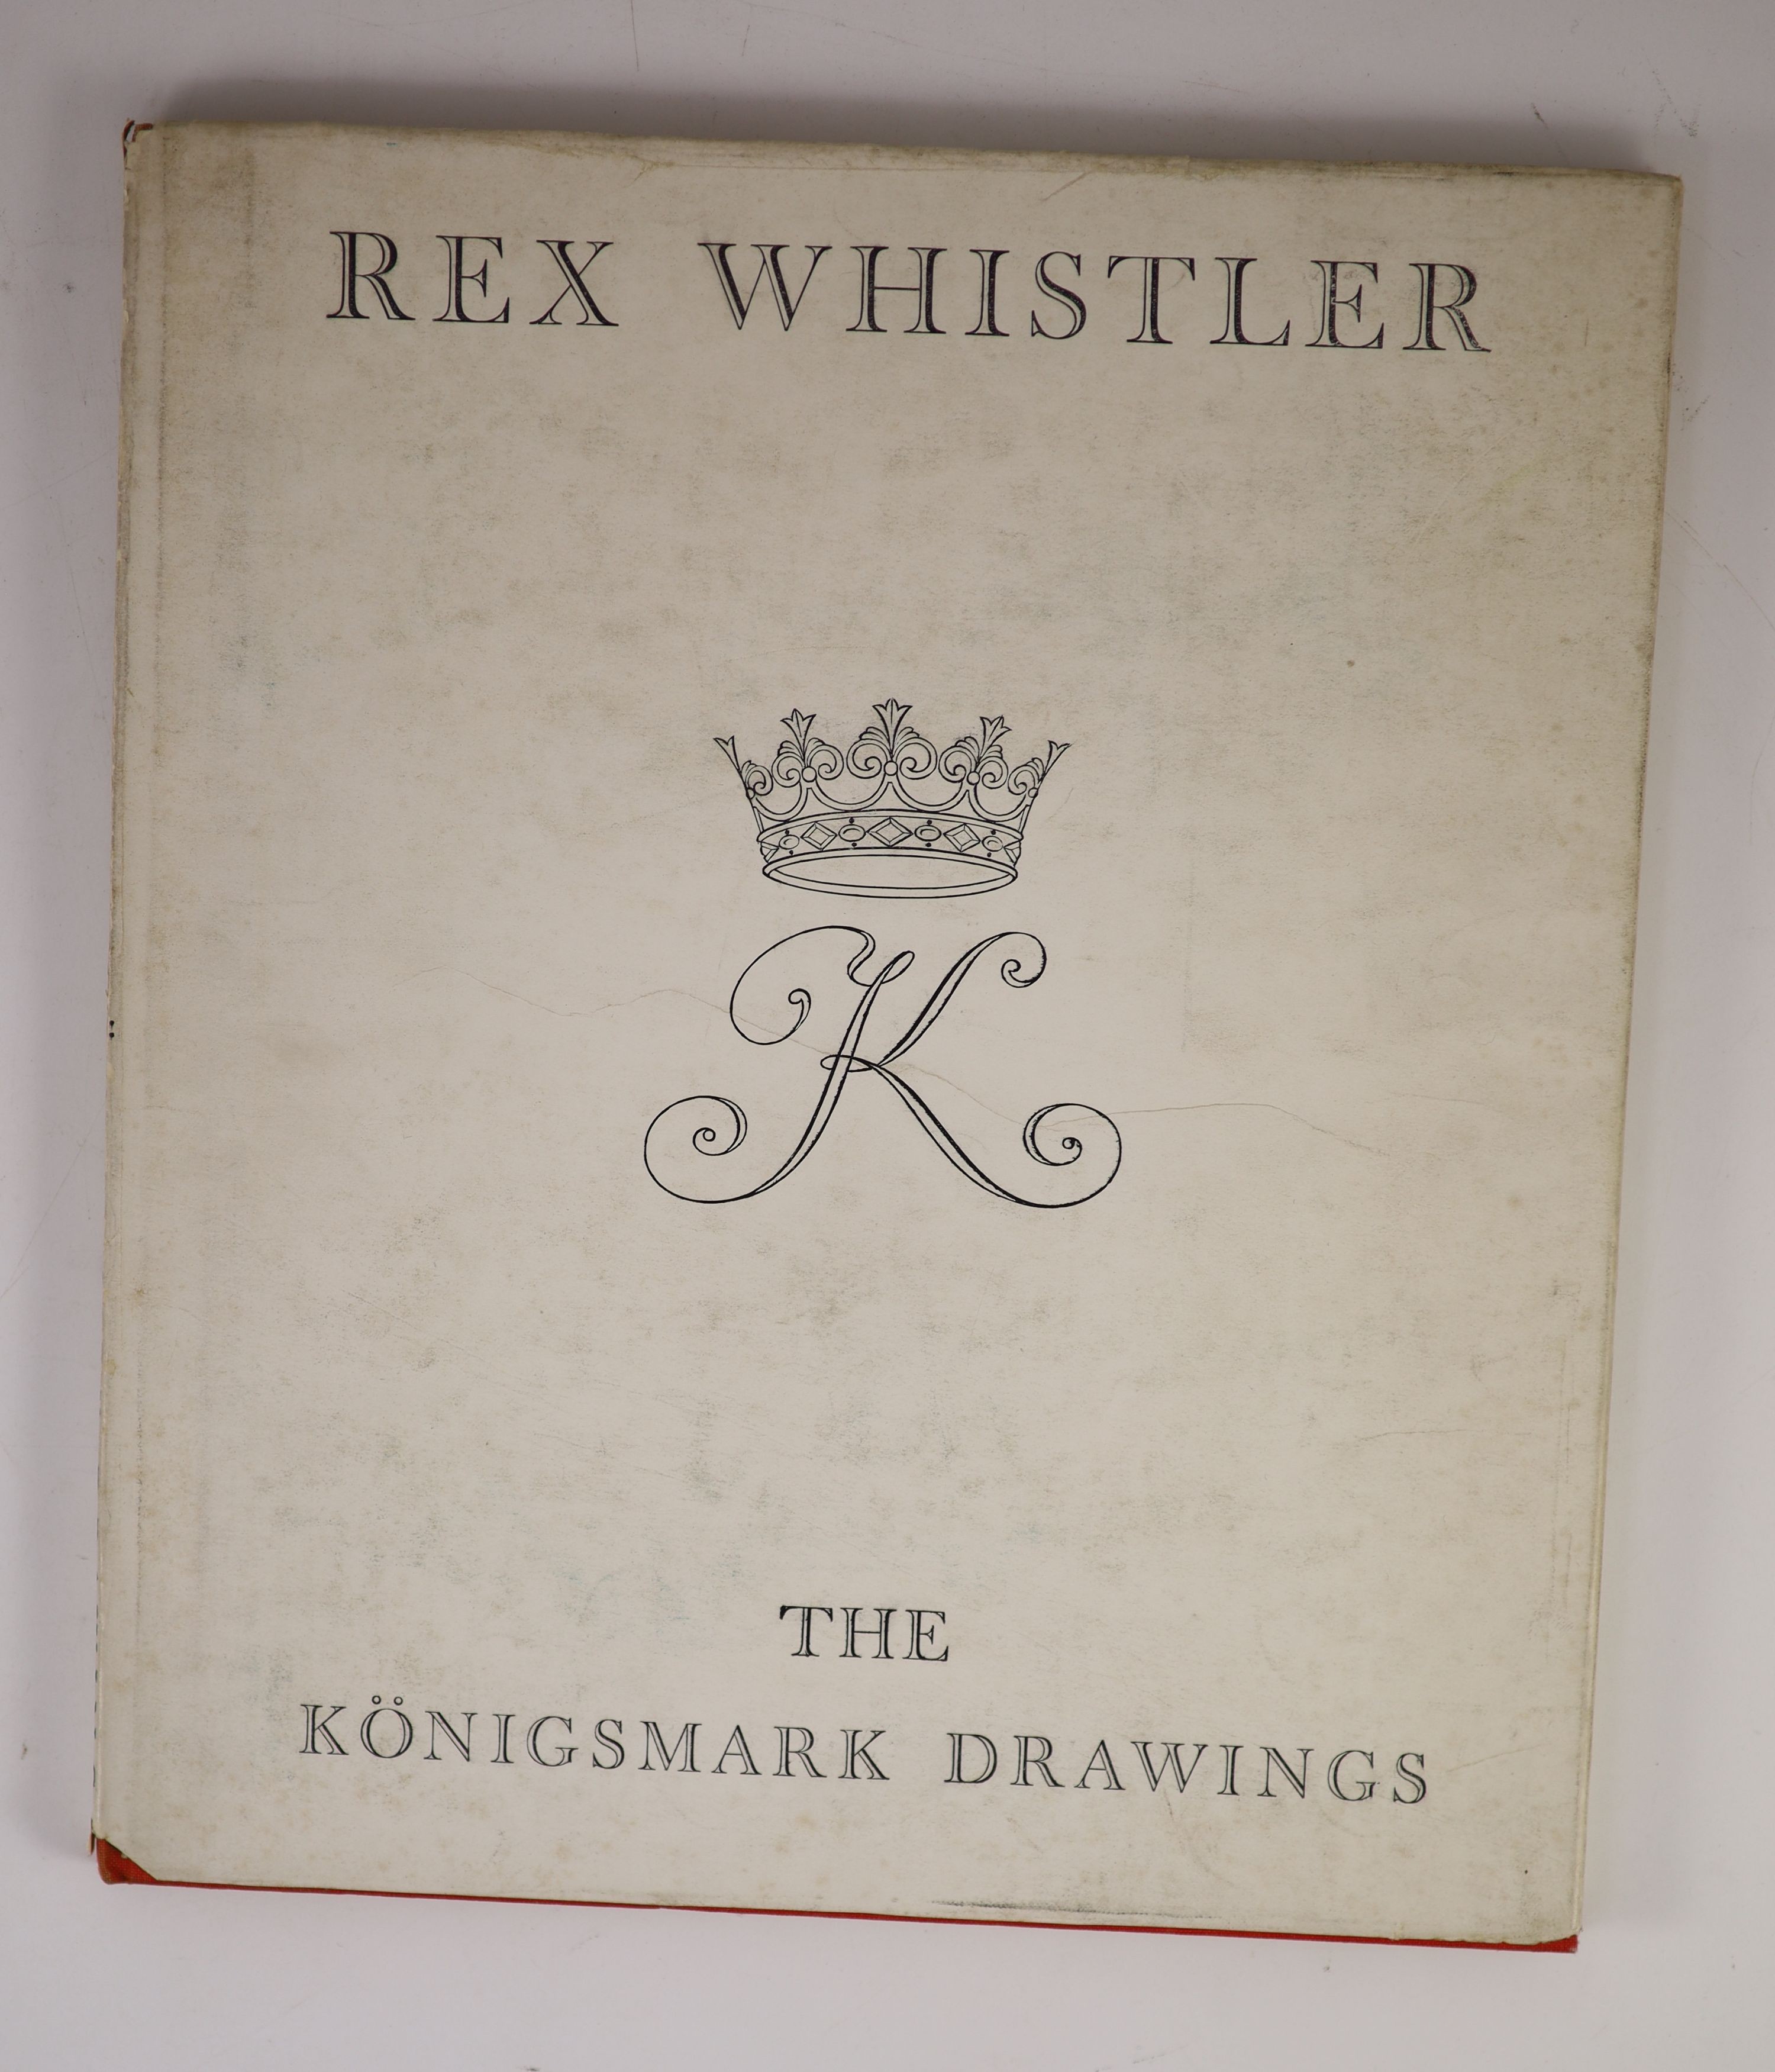 Whistler, Rex - The Konigsmark Drawings, one of 1000, intro by Laurence Whistler, 4to, original red cloth gilt, with d/j, The Richards Press, London, 1952